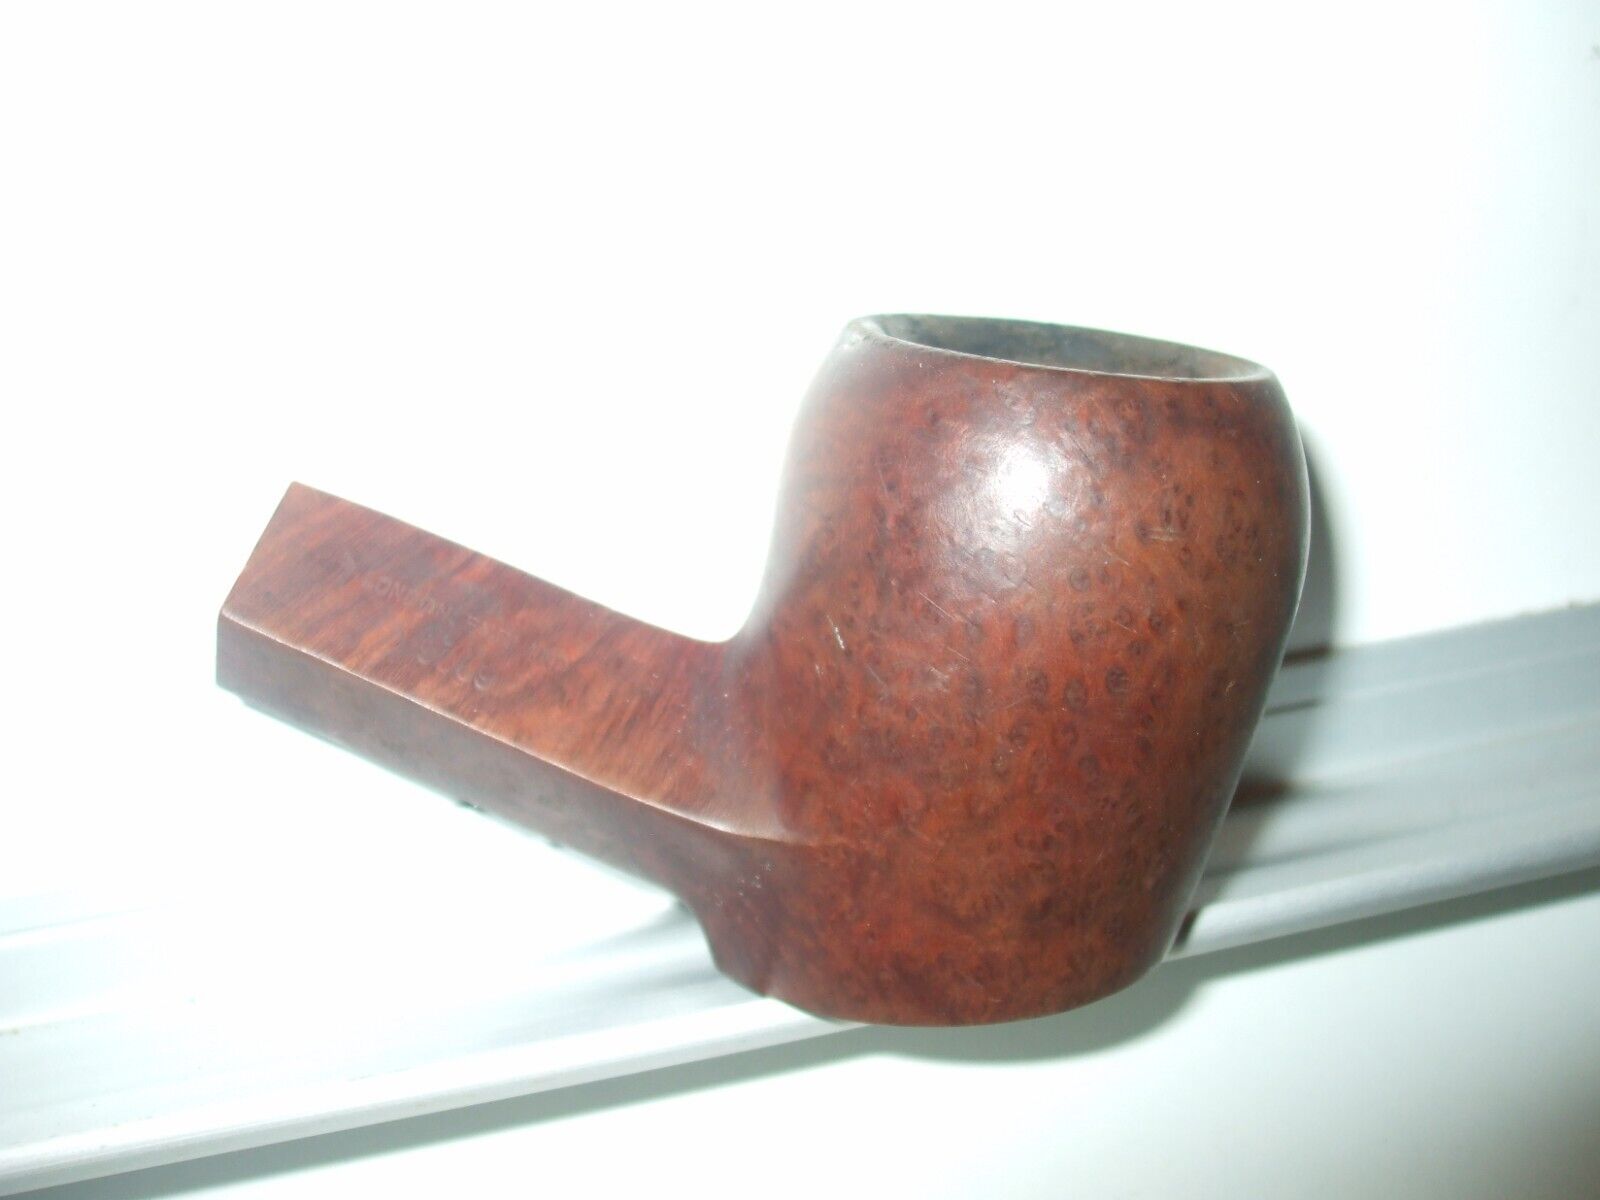 Vtg Collector GBD Speciale Standard Tobacco Smoking Pipe 9669 London, England